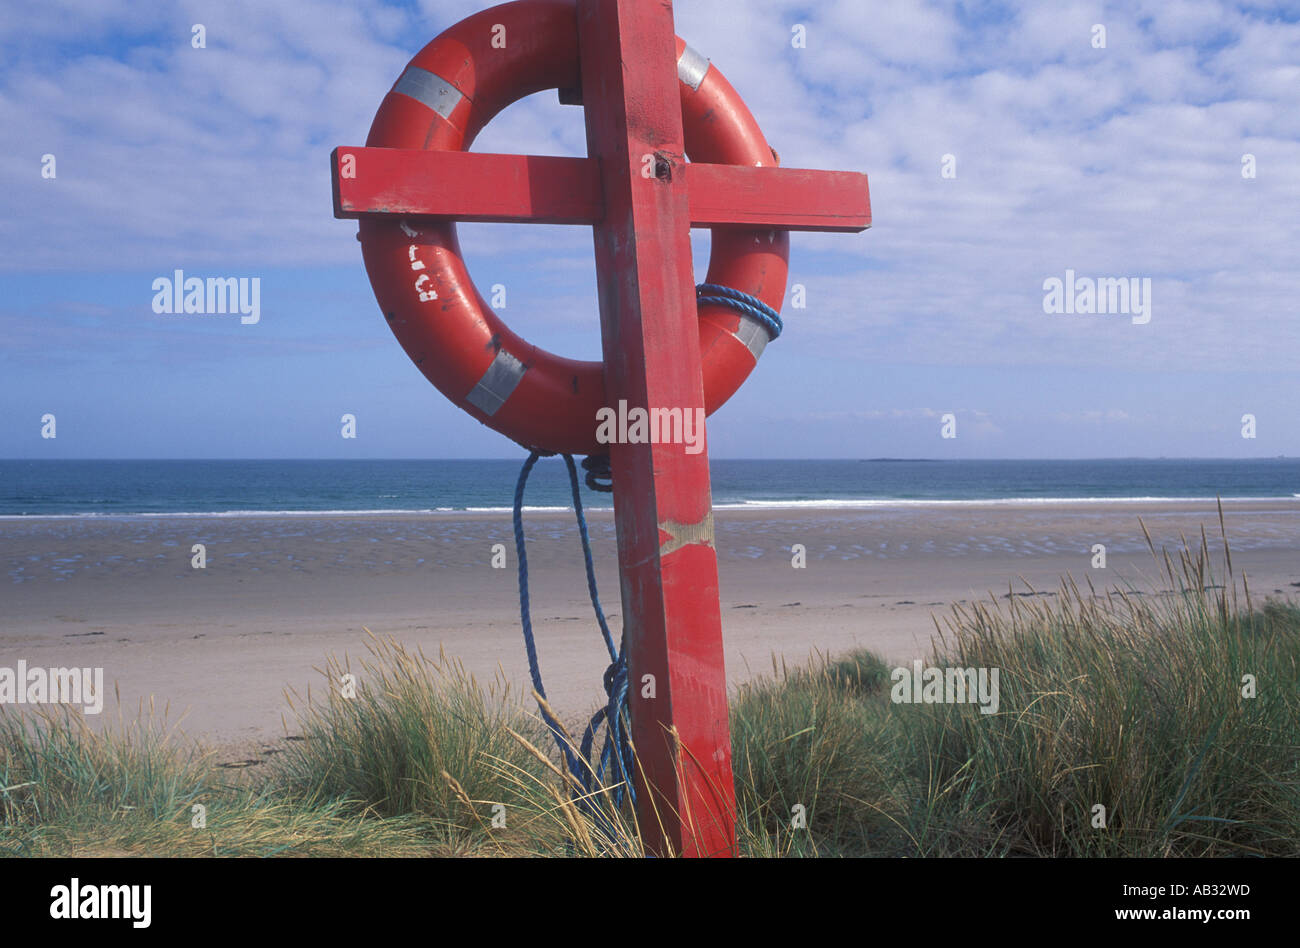 A life saver in the sand dunes of Bamburgh, Northumberland, UK. Stock Photo